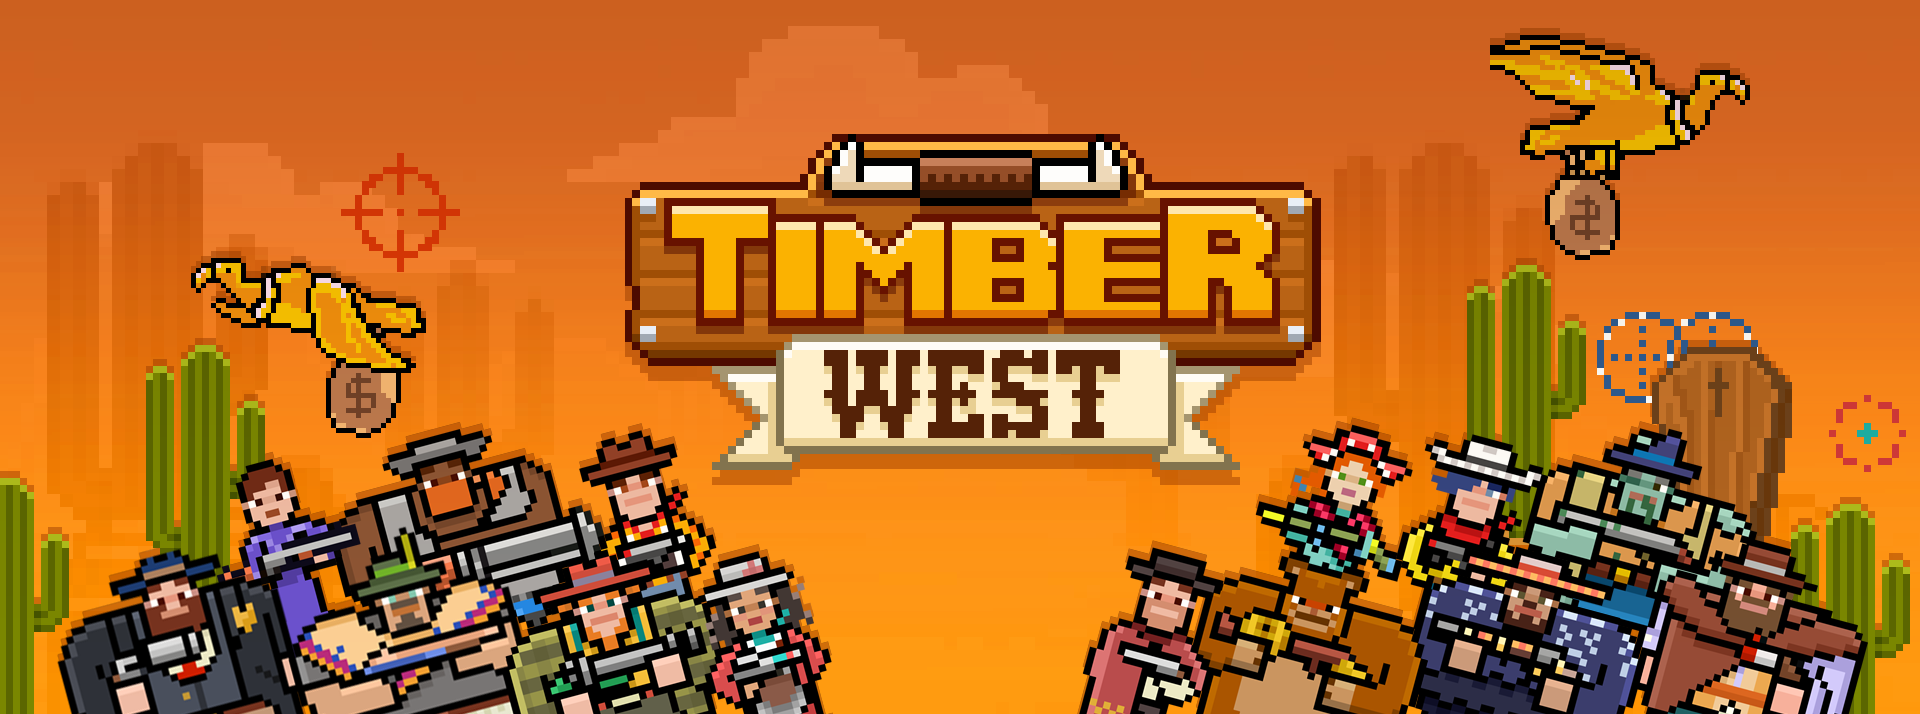 Banner of Timber West - 와일드 웨스트 아케이드 슈터 